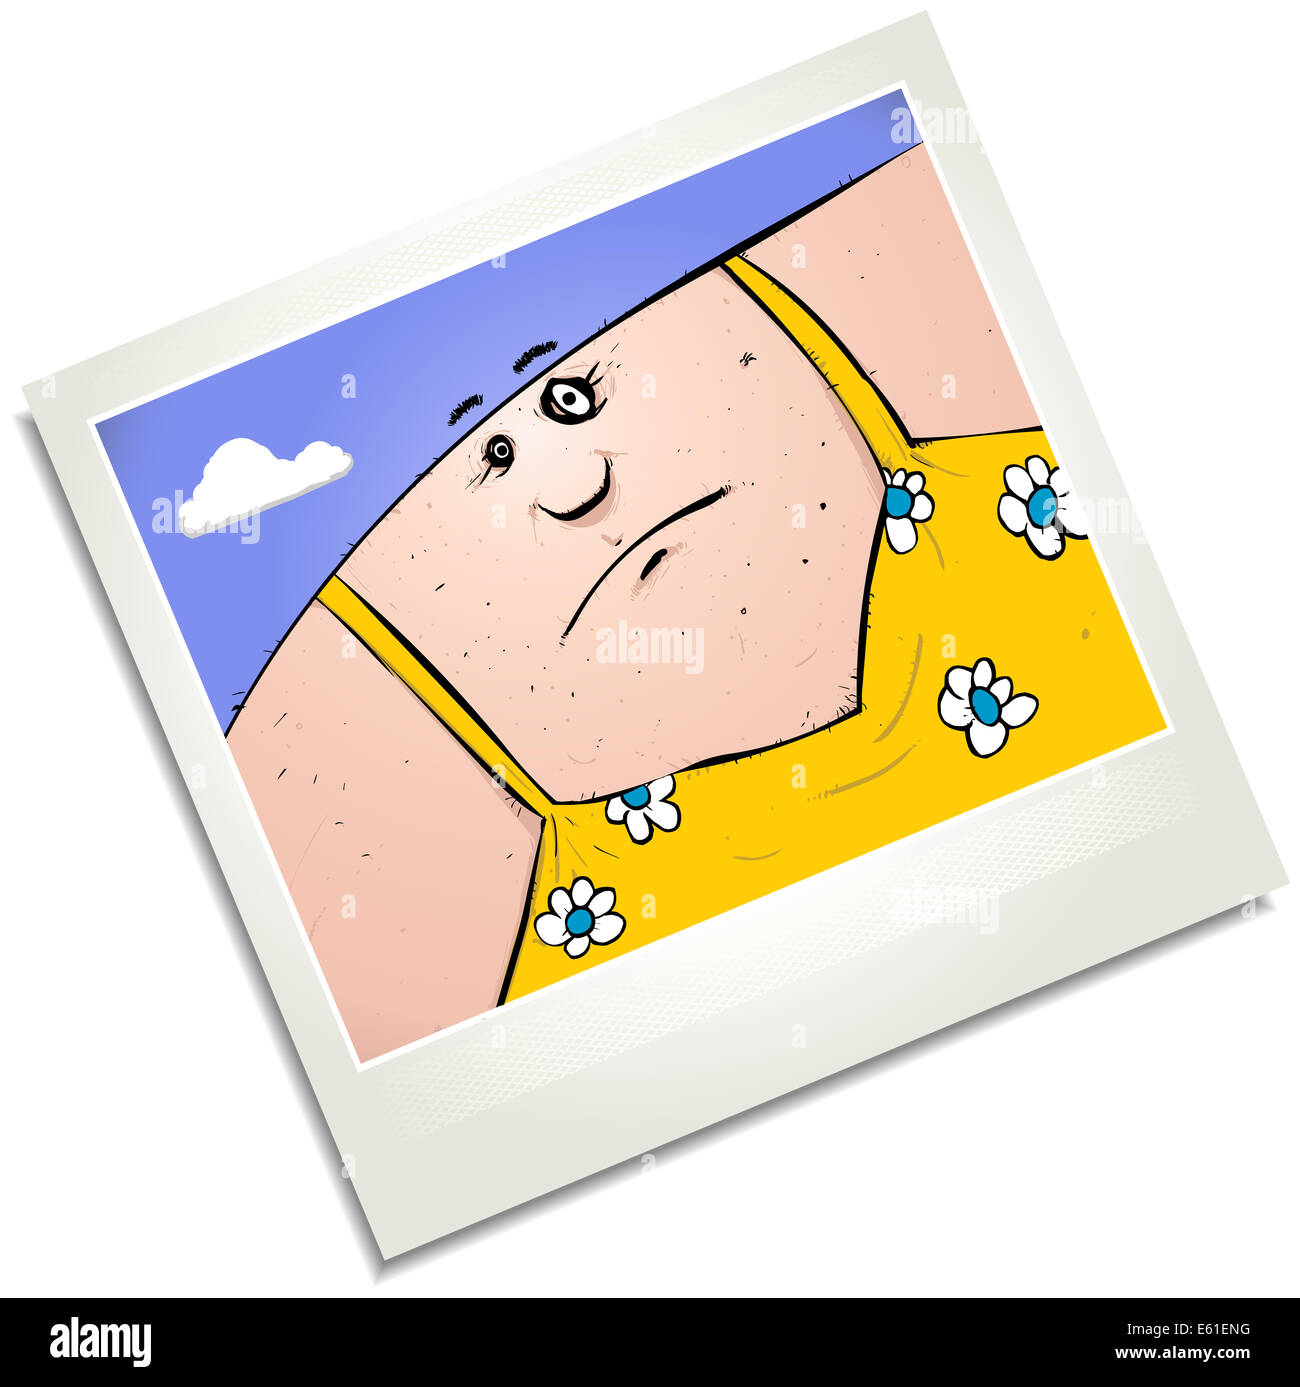 Illustration of a polaroid of a man in a dress. Stock Photo